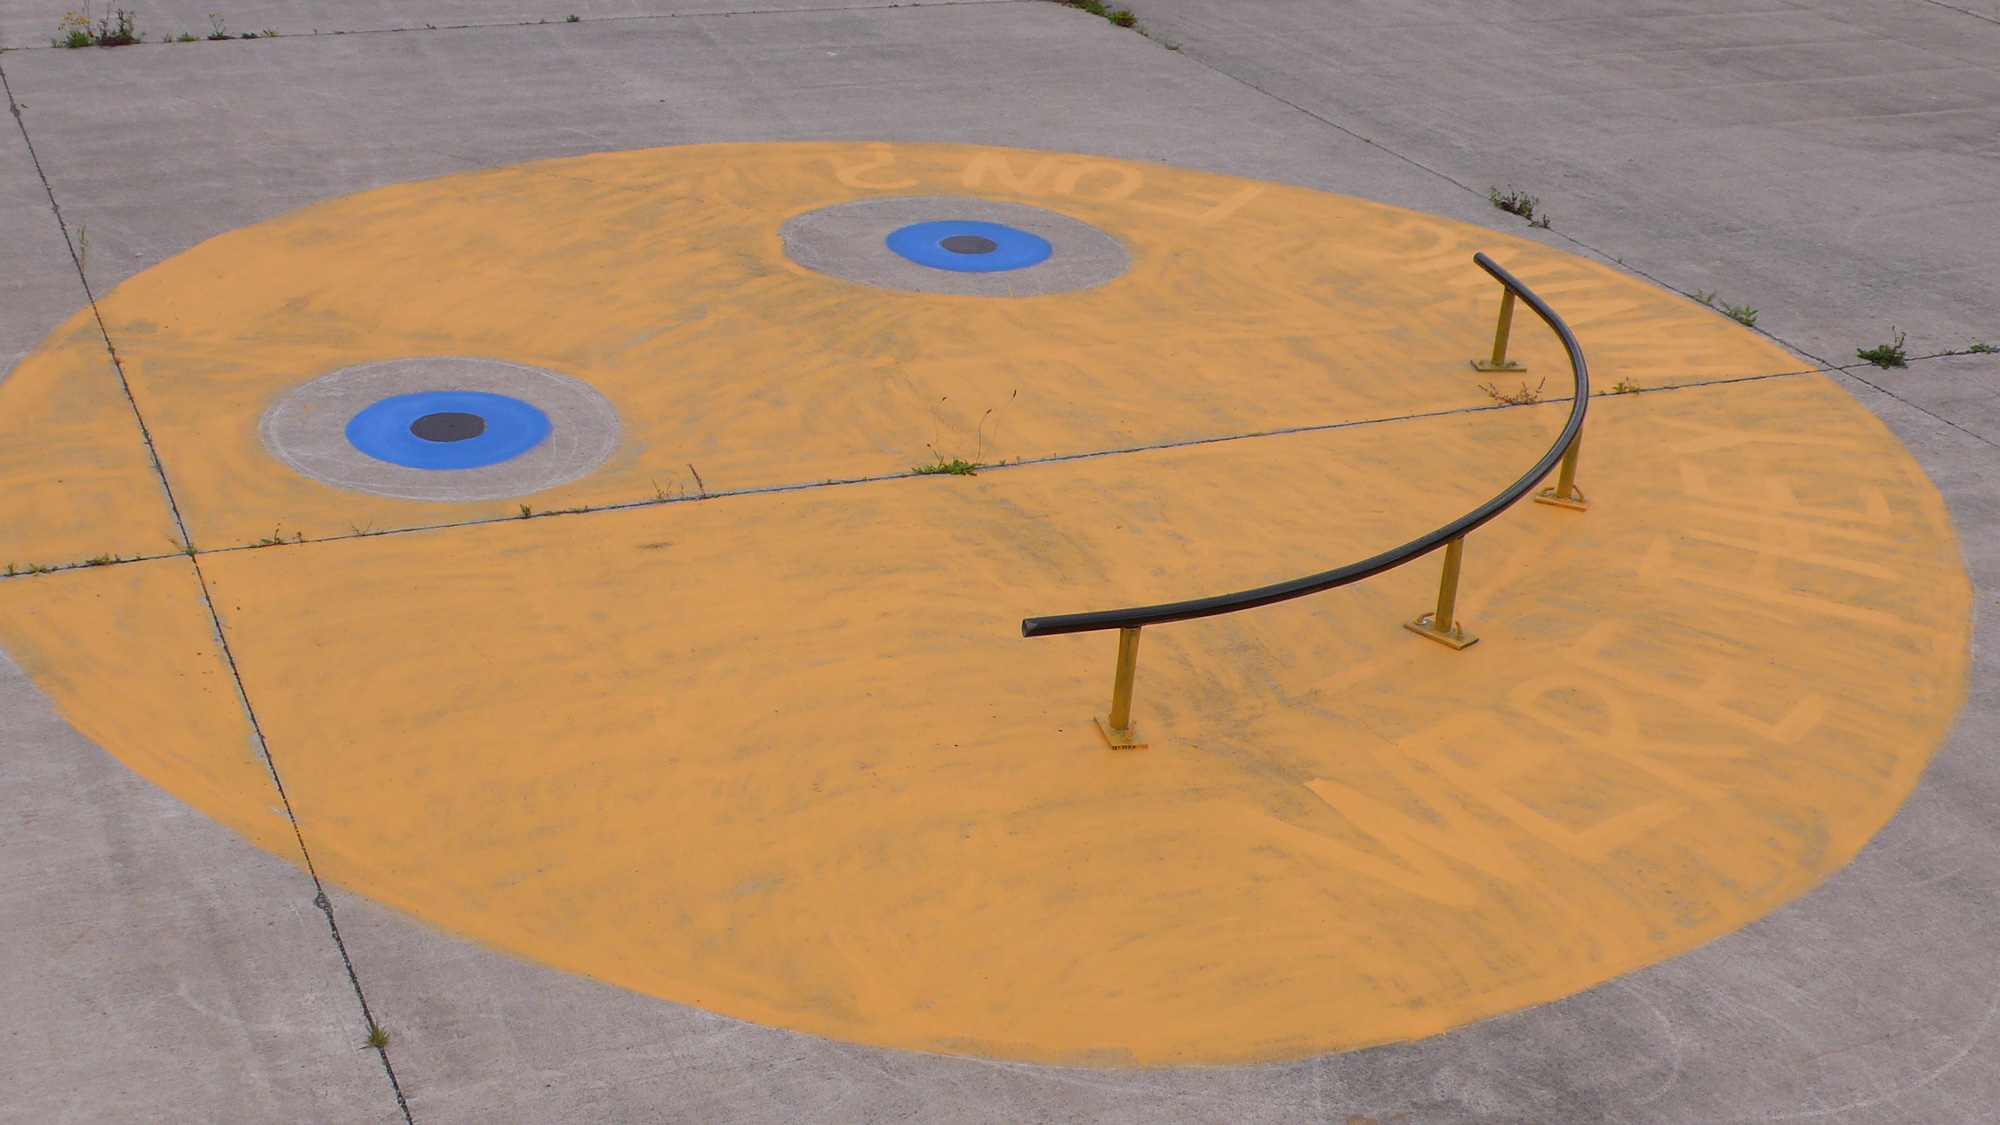 A curved rail design and made for skateboarding positioned on a painted smiley face with the words 'Were they having fun?'